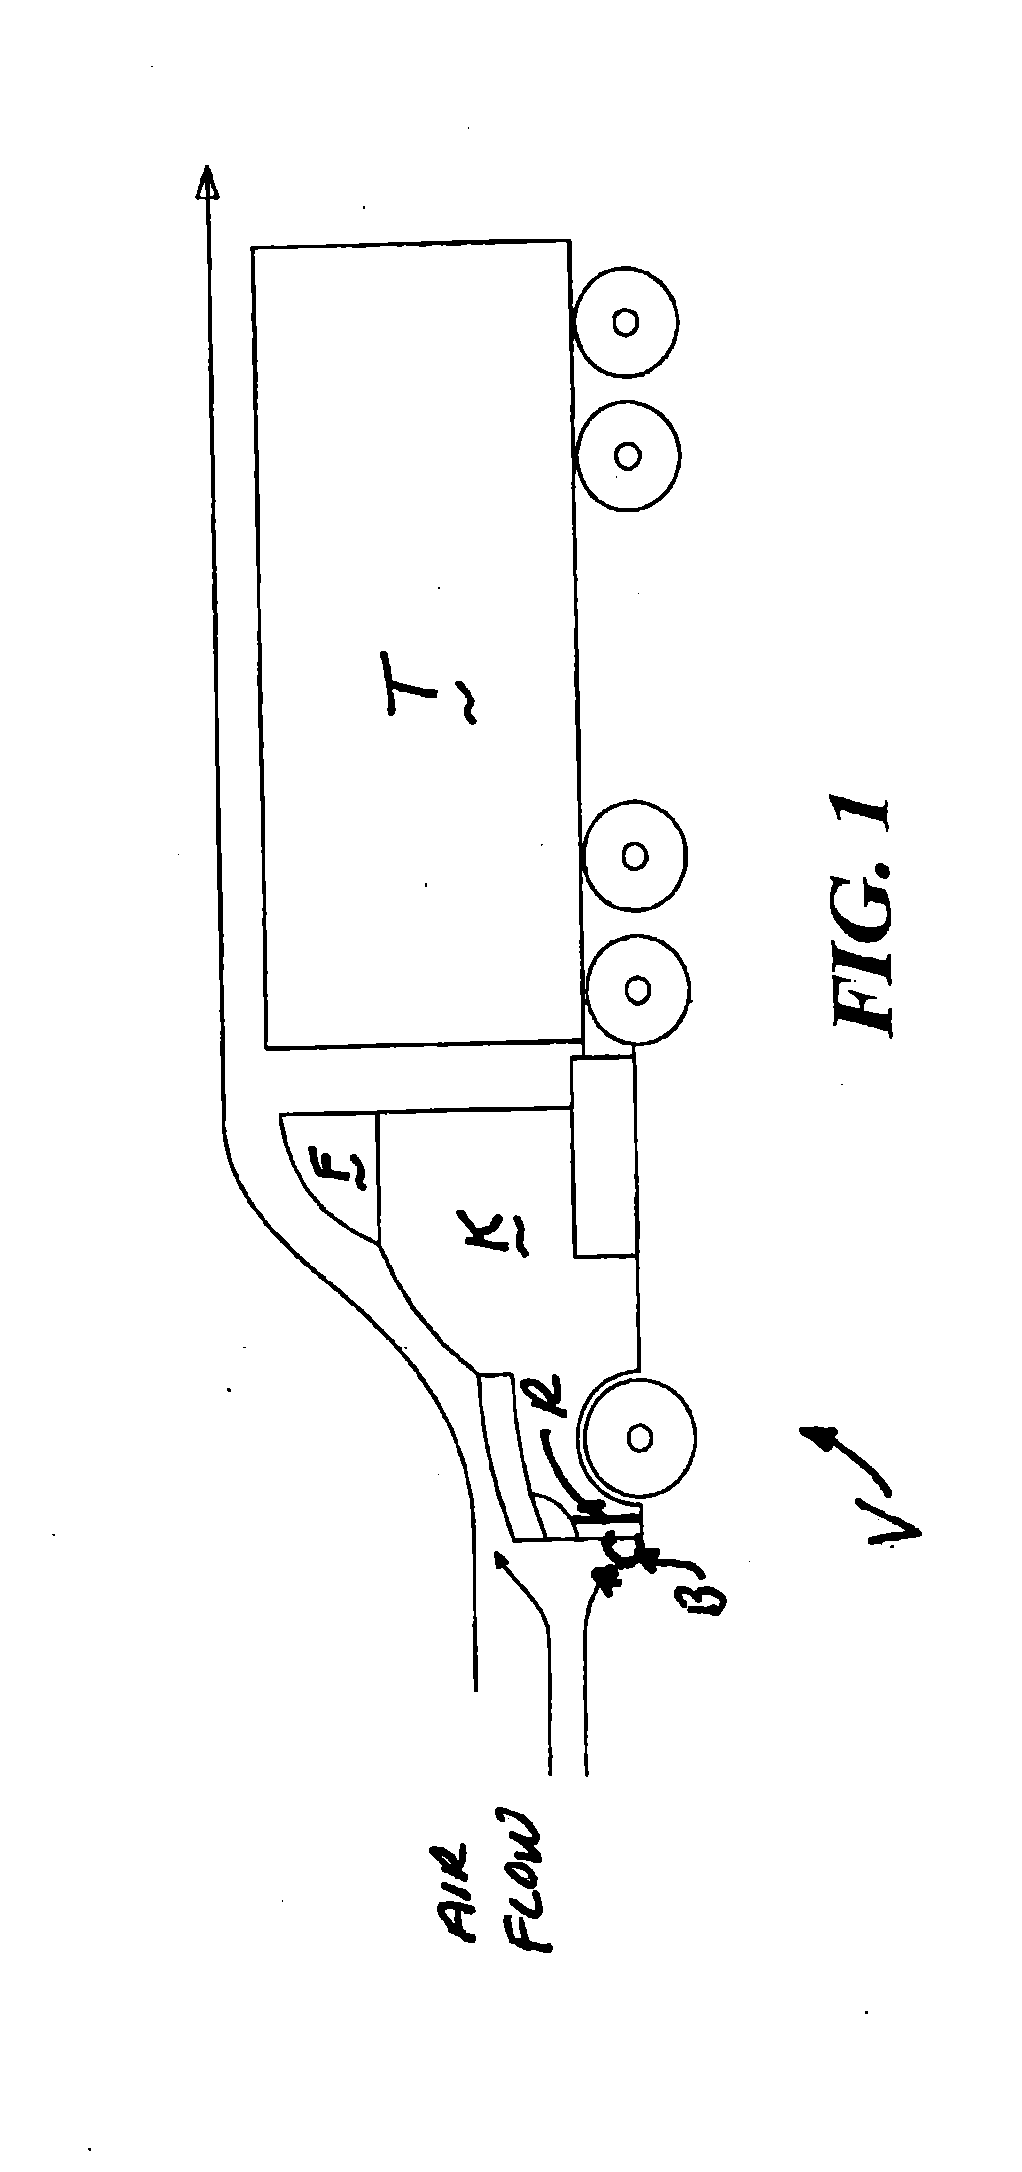 Variably openable radiator cowling, shroud, or fairing for over the road vehicles and the like